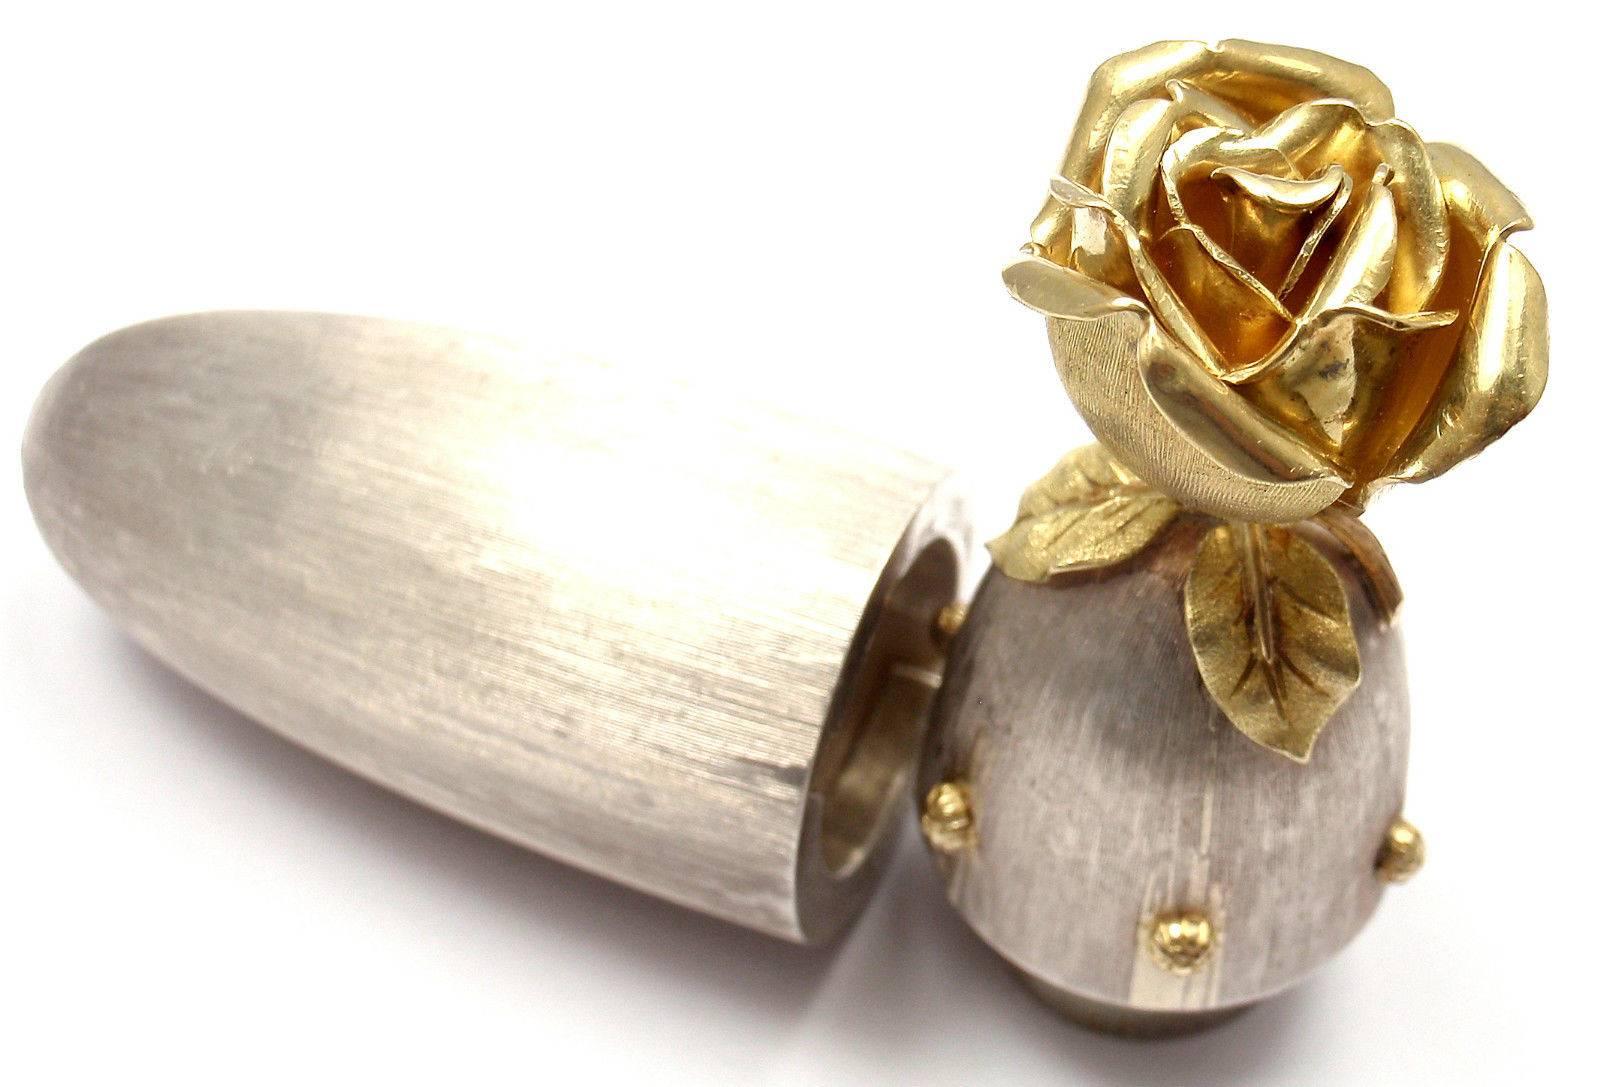 18k Yellow Gold And Sterling Silver Rose Flower Pill Box by Mario Buccellati. 

Details: 
Measurements: 3